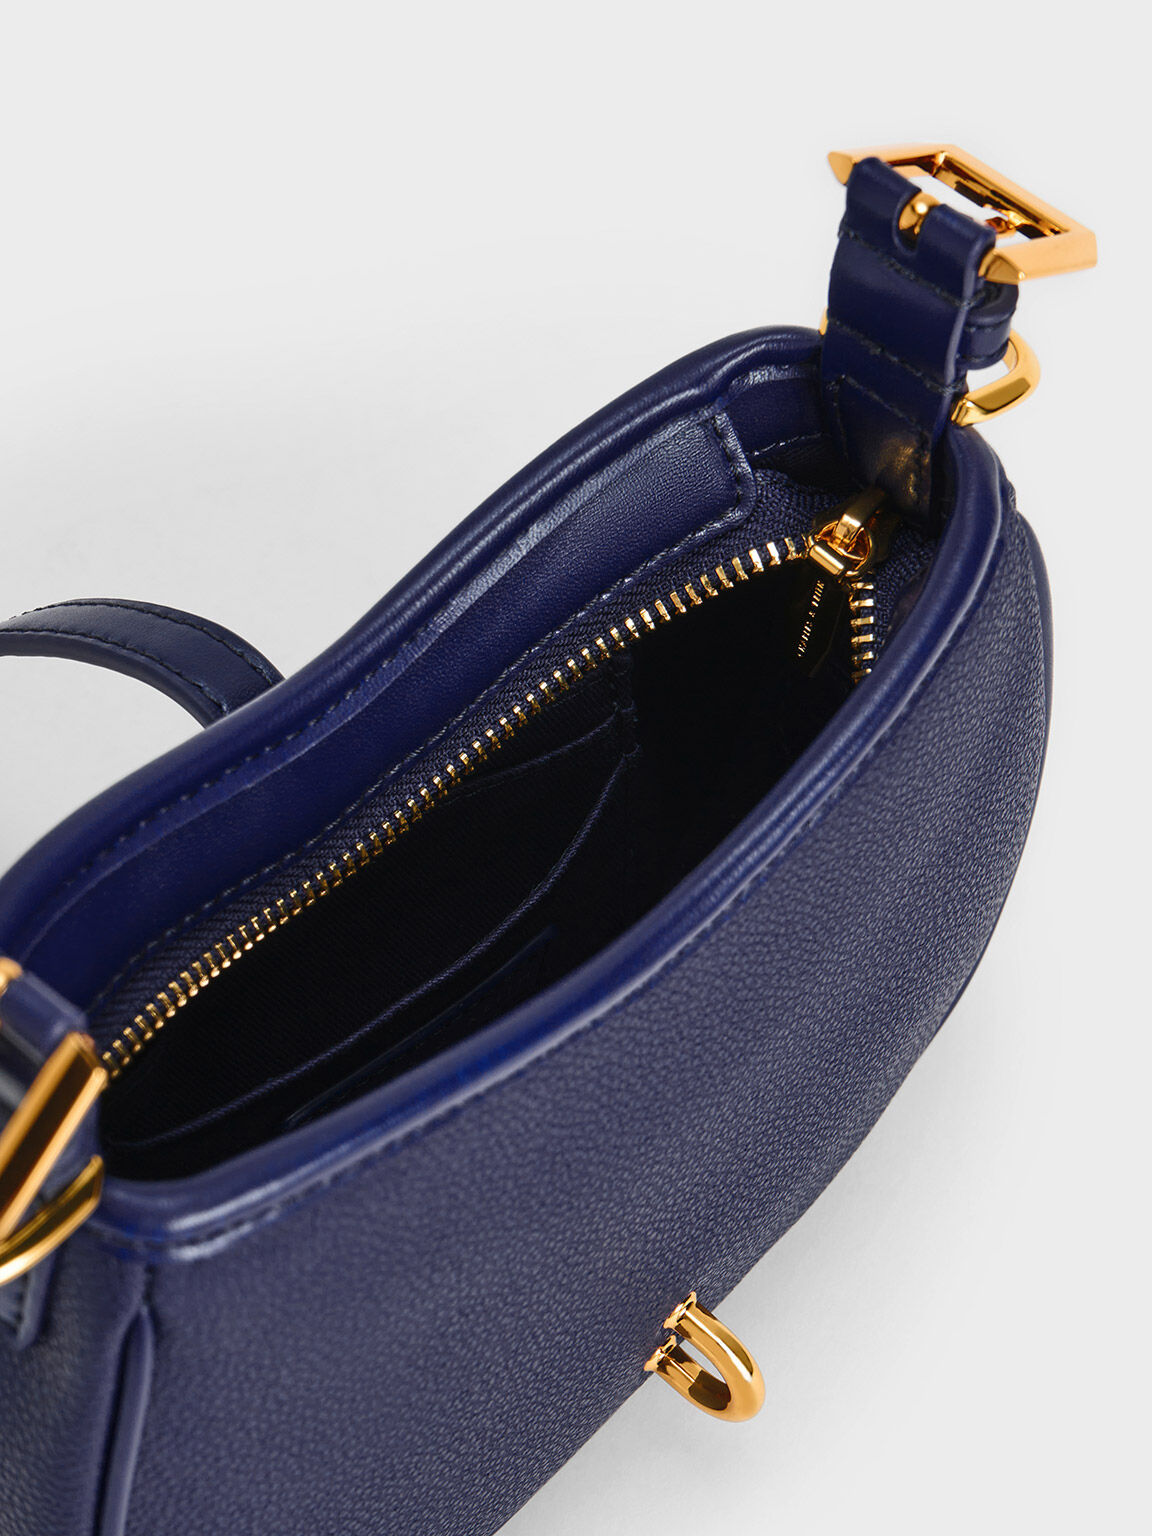 Charles & Keith Thessaly Metallic Accent Micro Bag in Blue